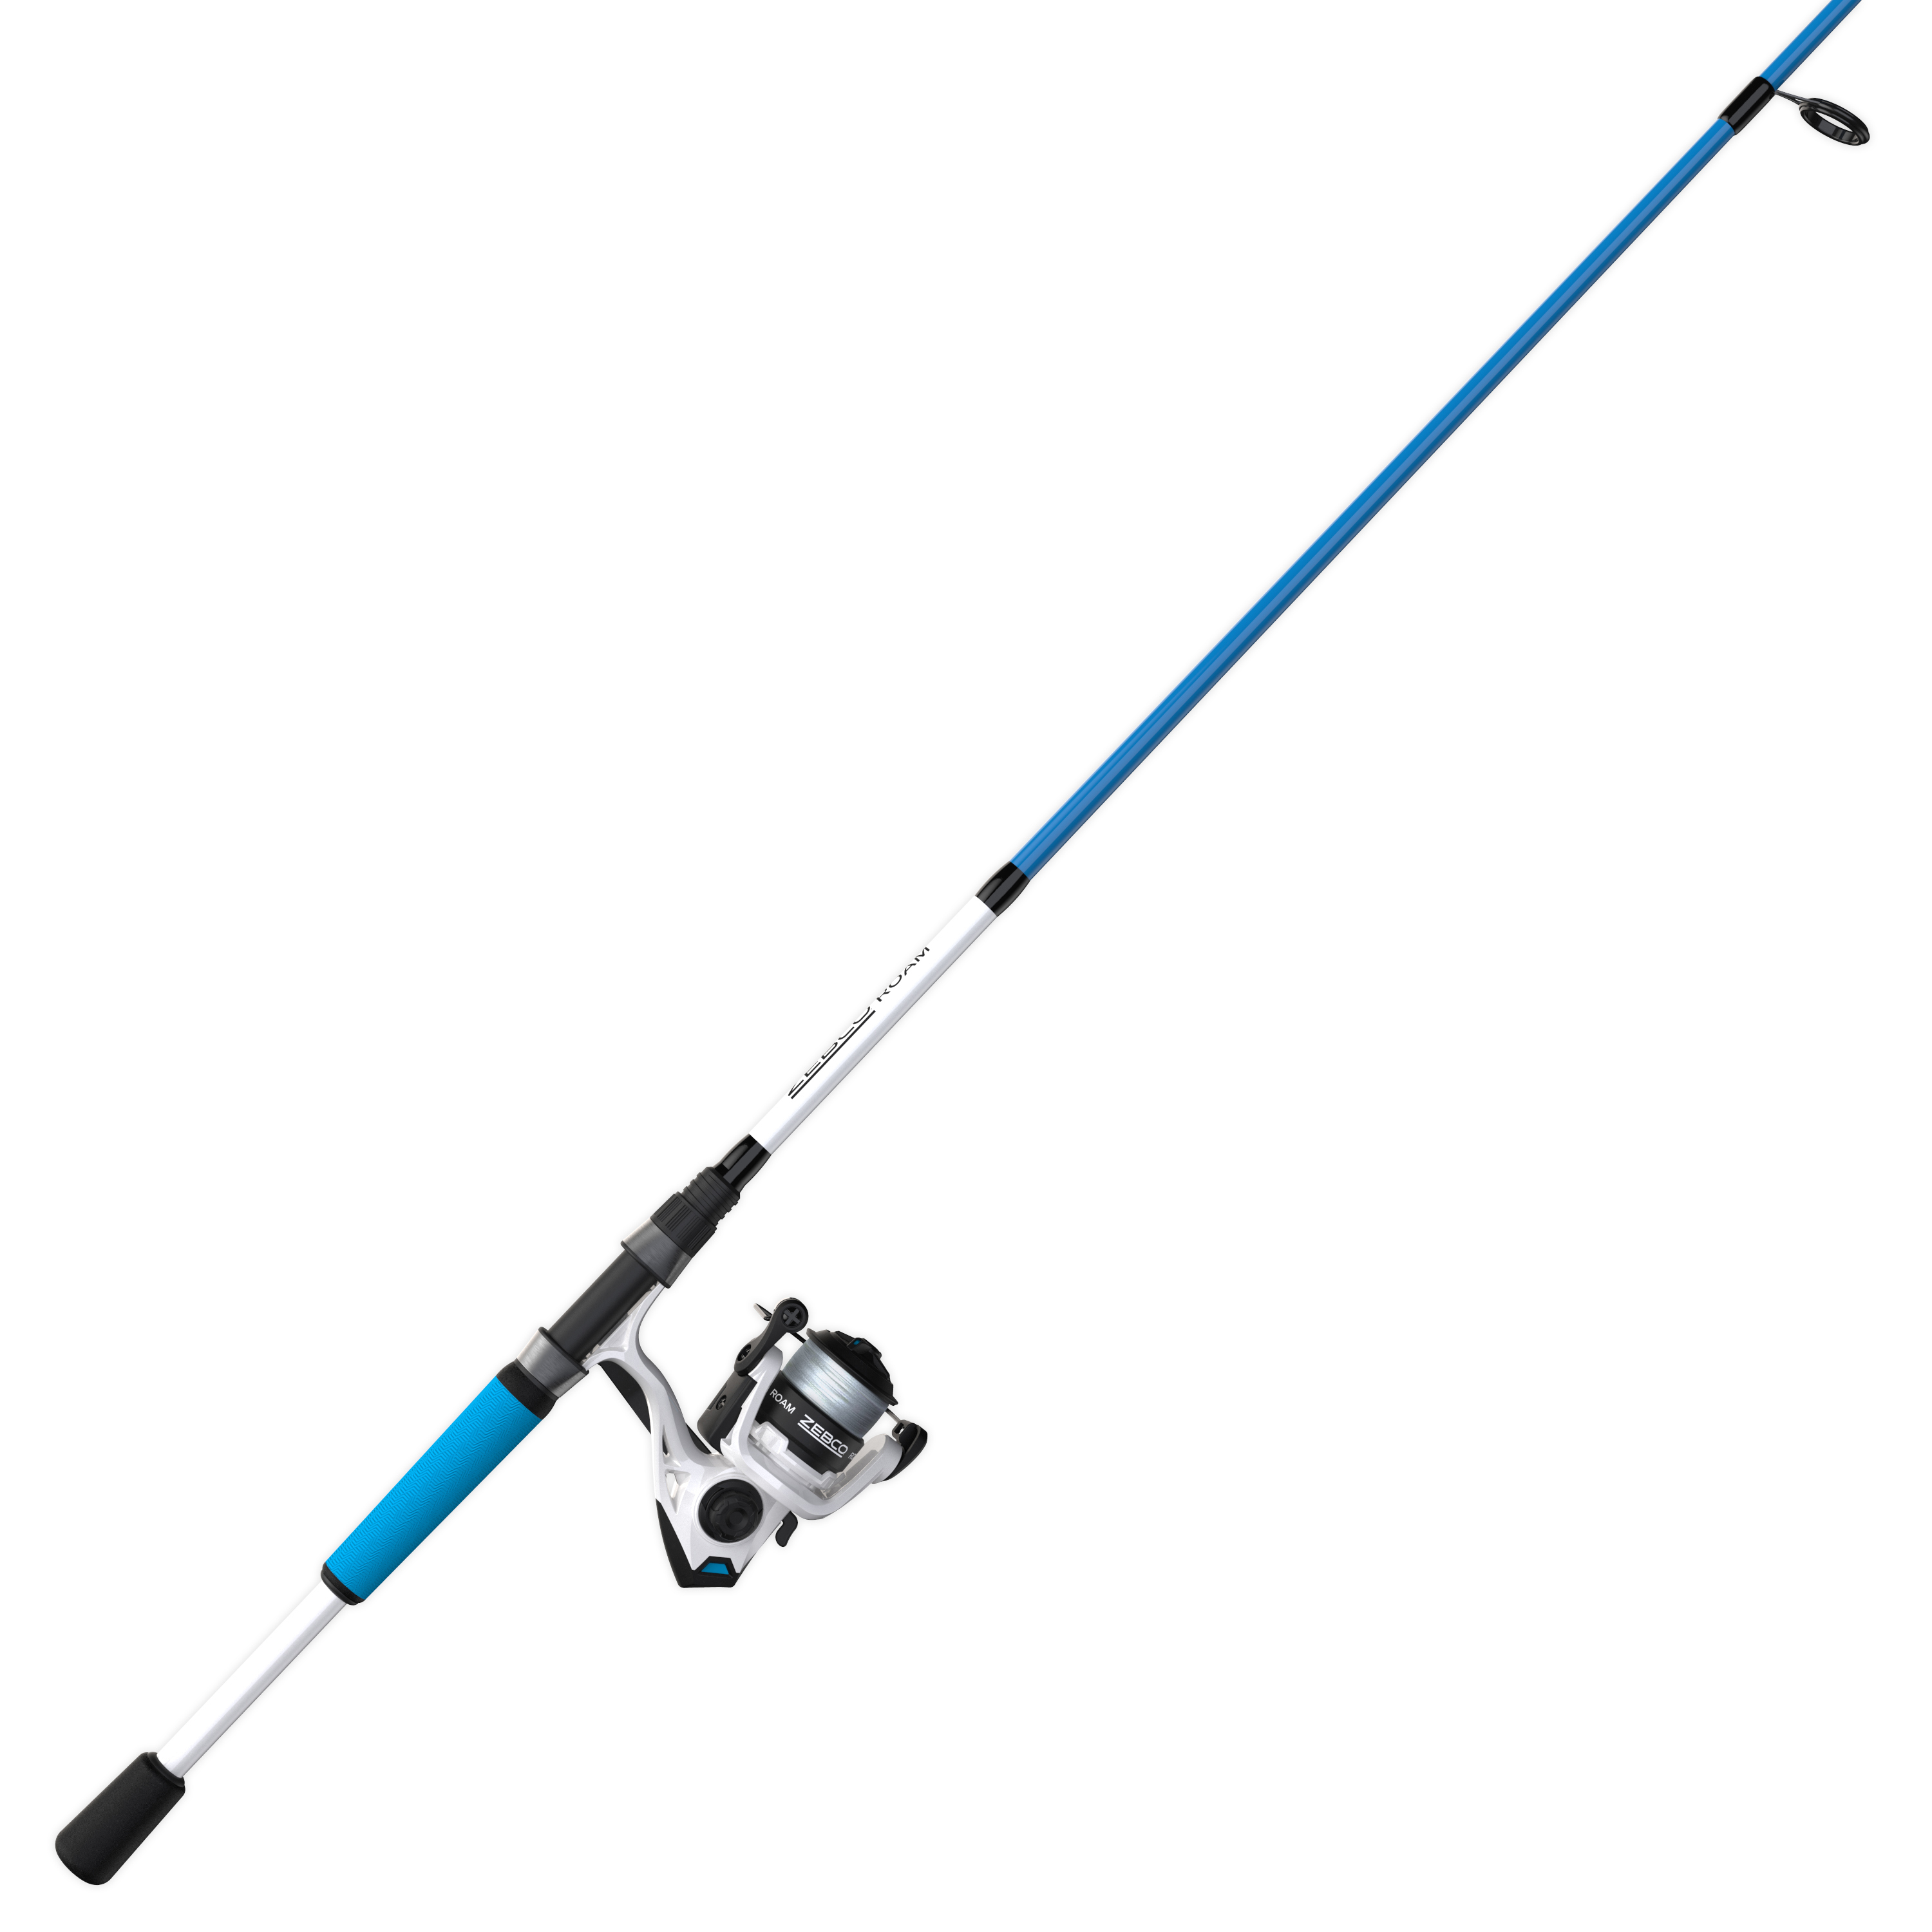 Zebco 33 Spinning Reel and Telescopic Fishing Rod Combo - Buy